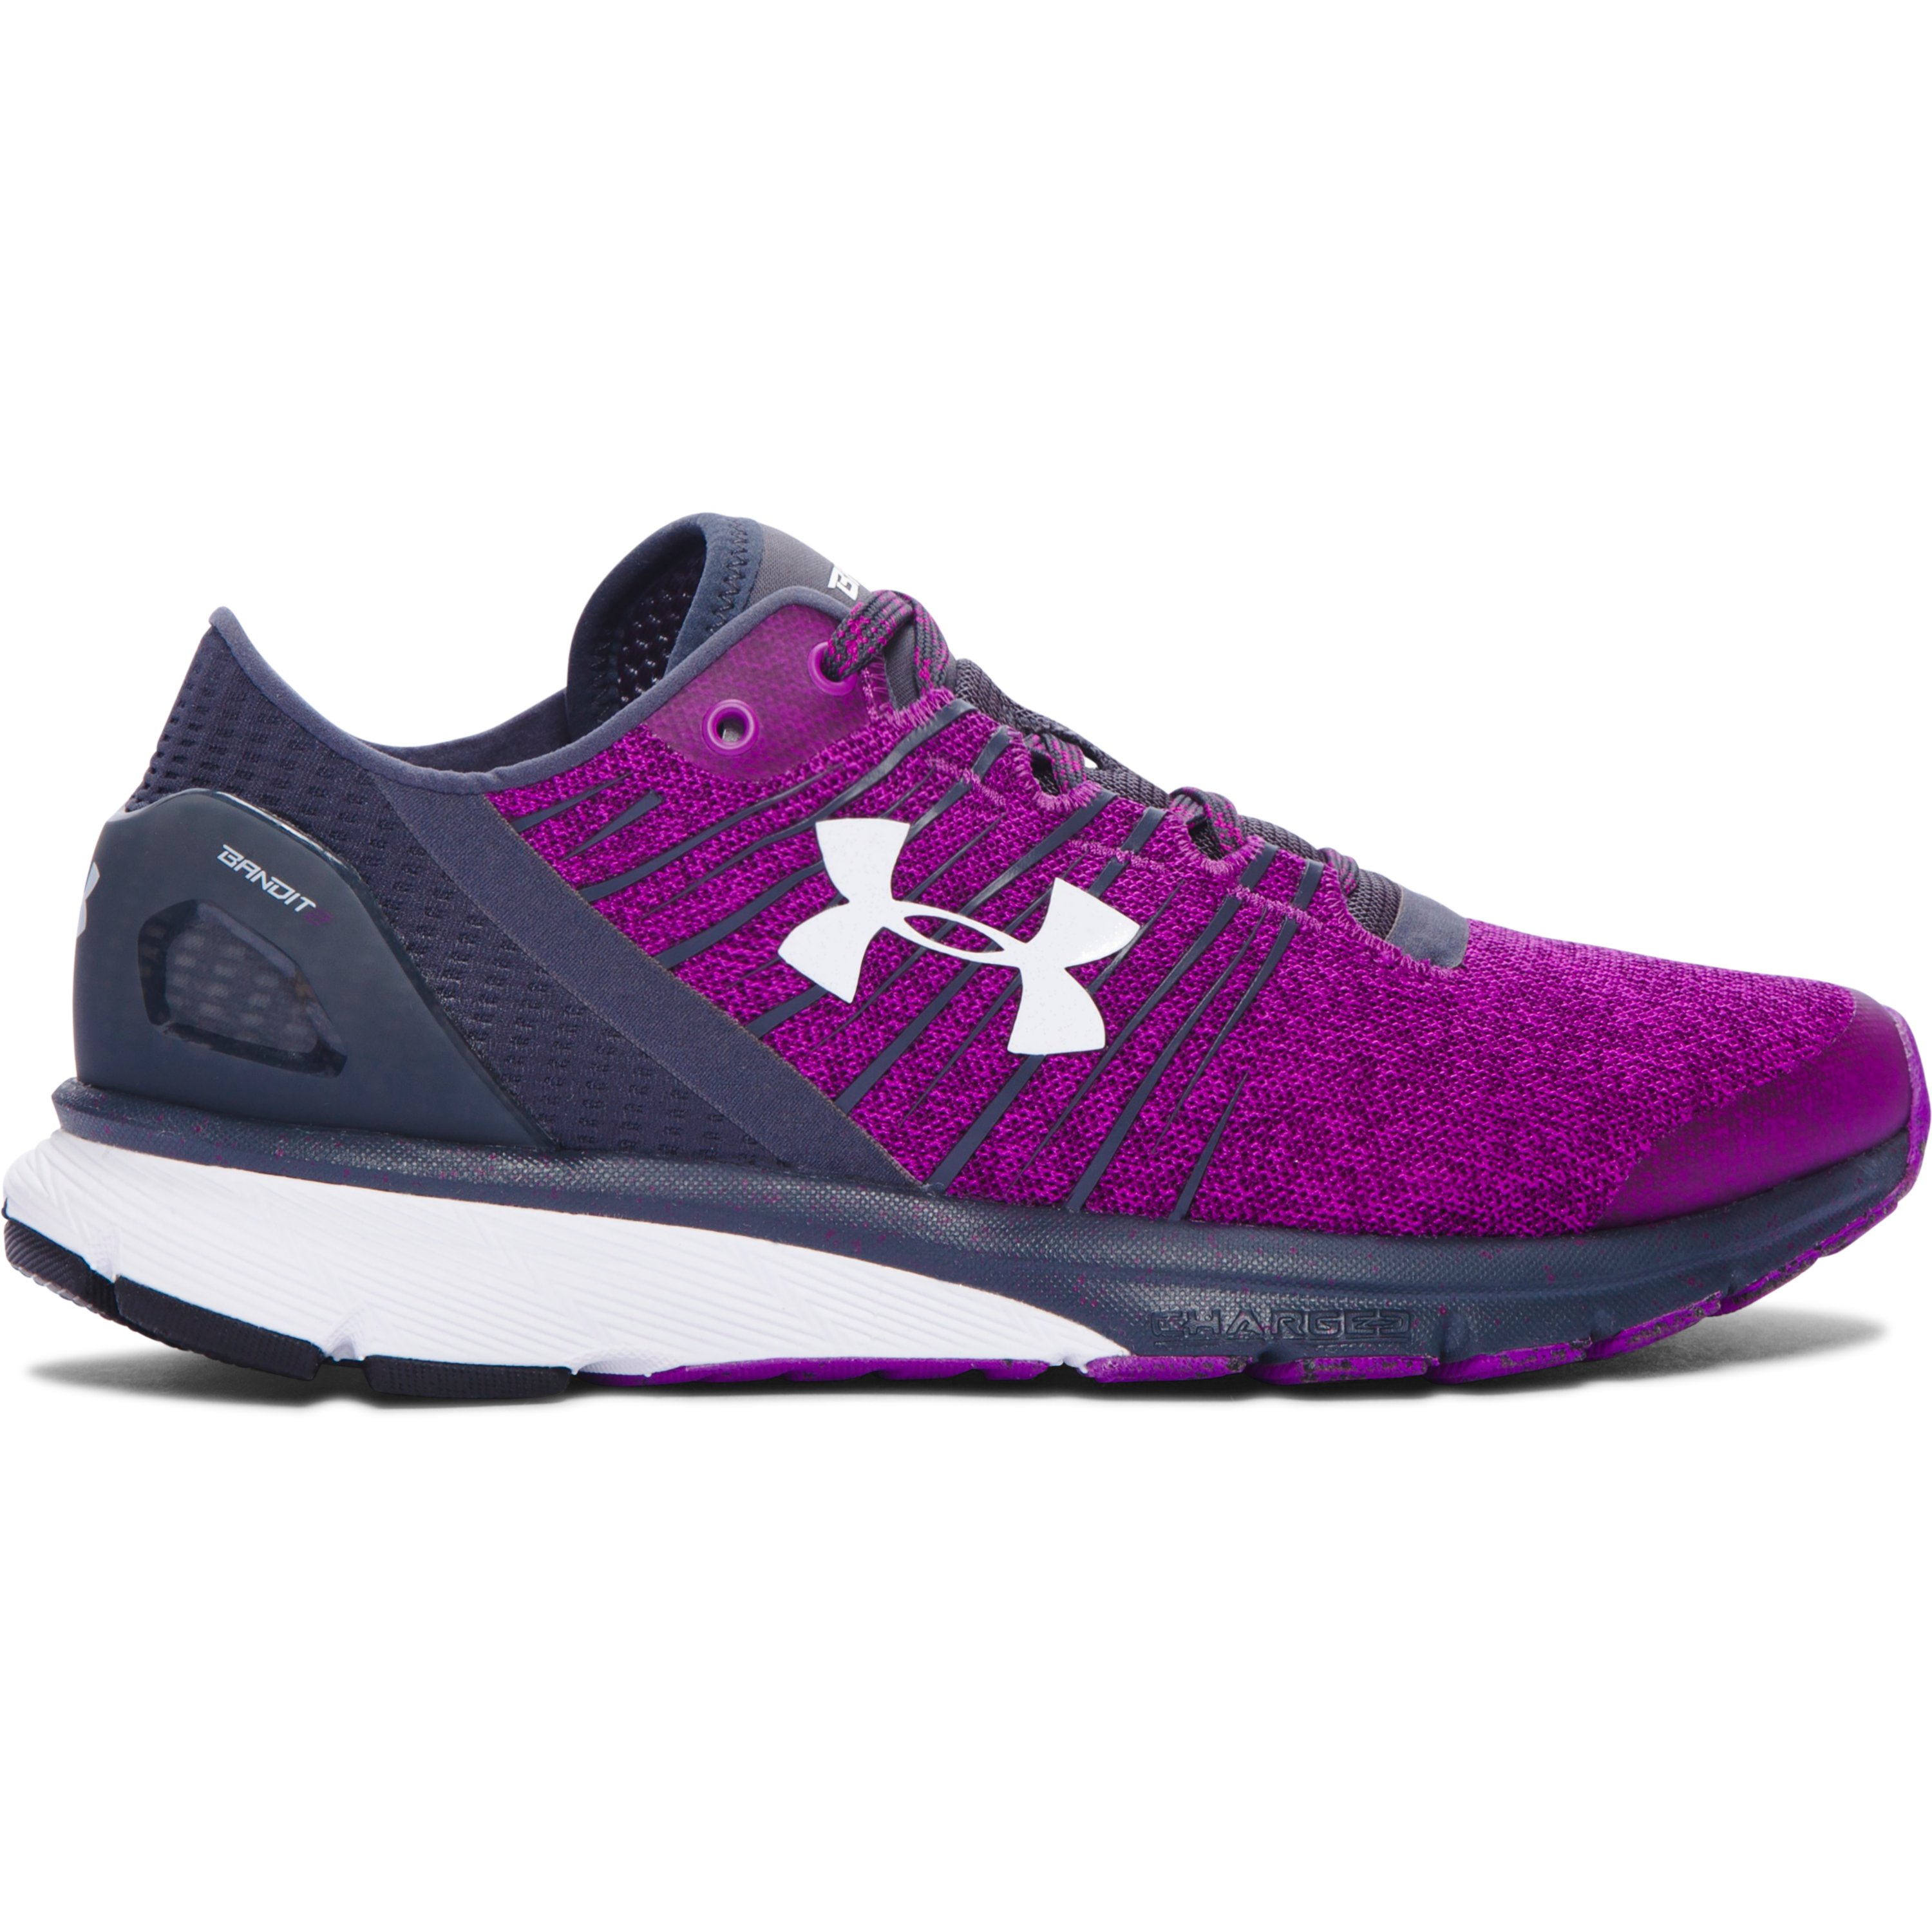 Under Armour Women's Ua Charged Bandit 2 Running Shoes in Purple | Lyst